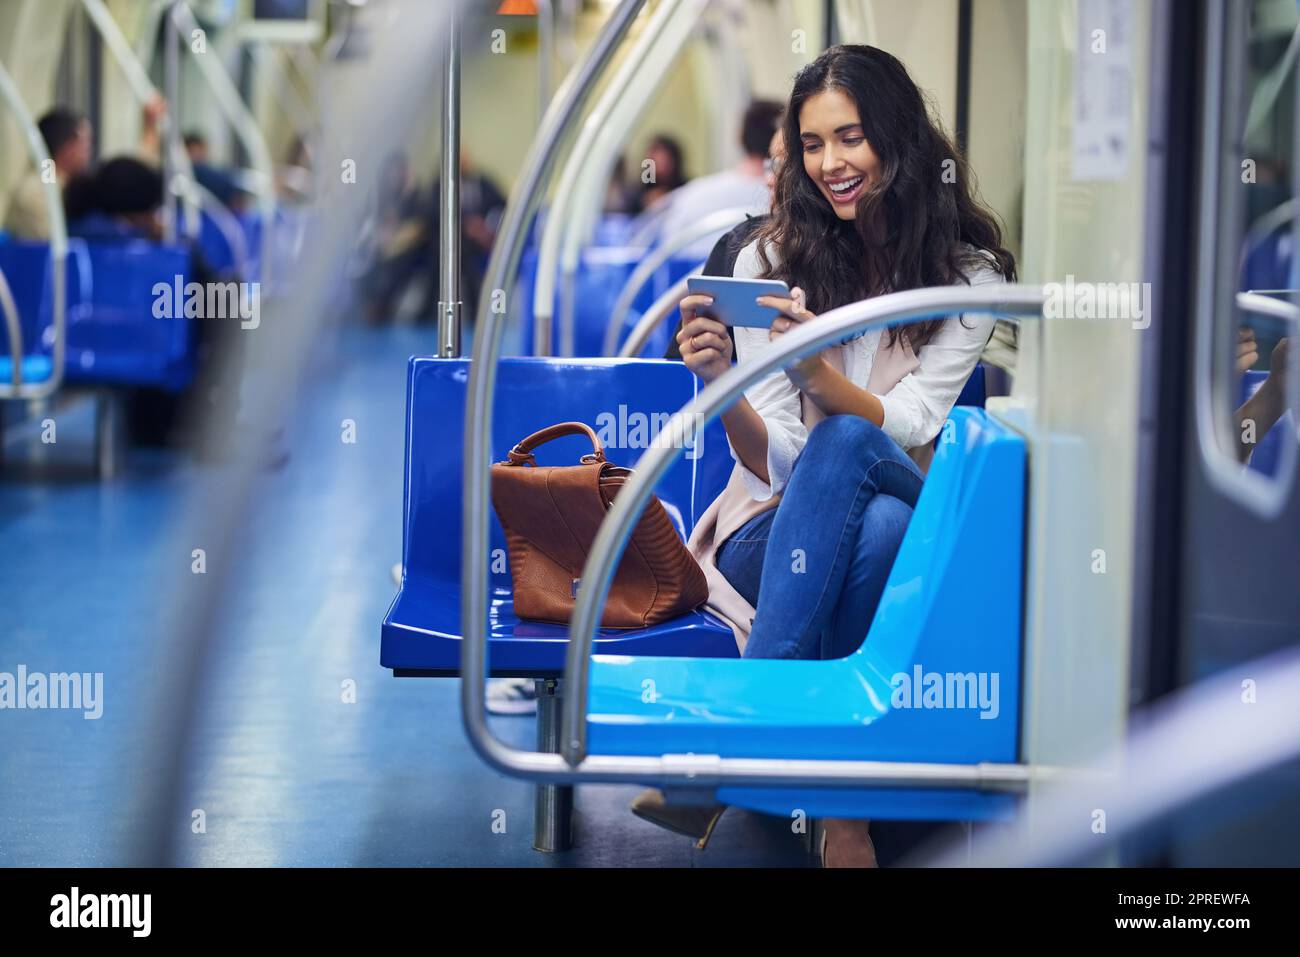 She can binge on shows while commuting. a young attractive woman using a cellphone while commuting with the train. Stock Photo